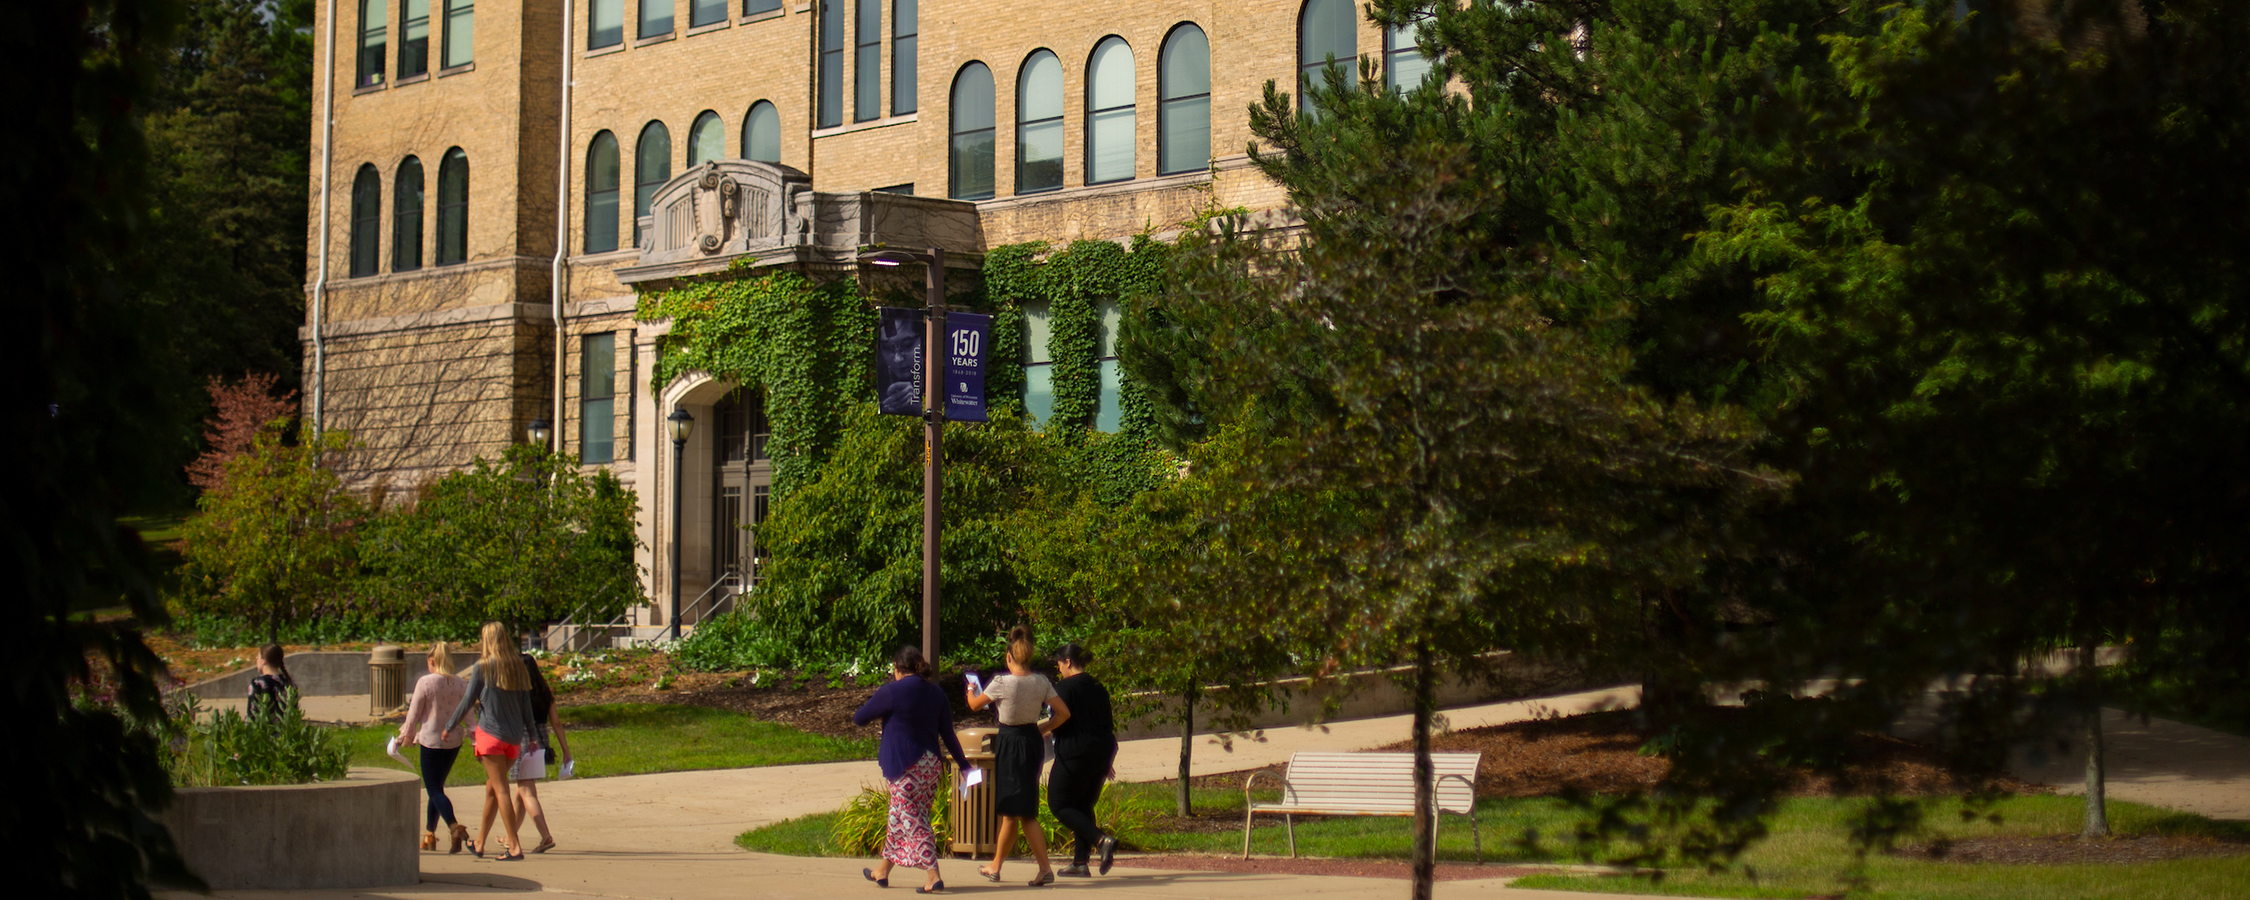 Picture of people walking in front of Hyer Hall on UW-Whitewater campus